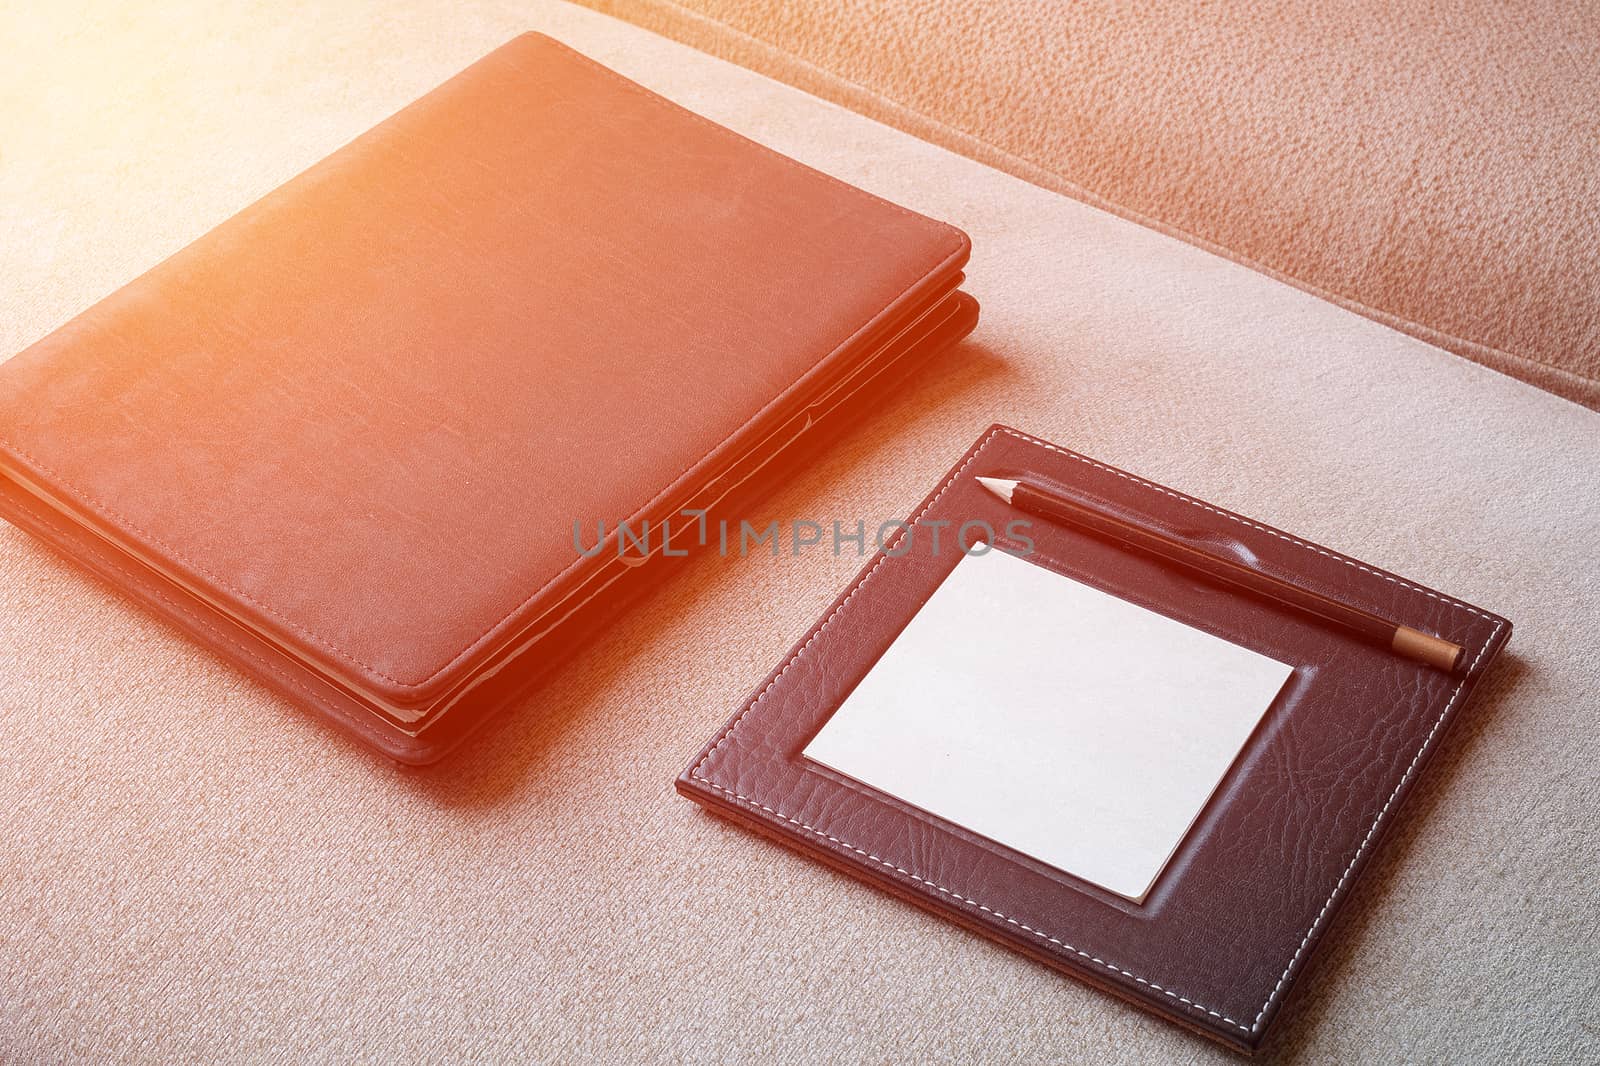 Black leather note book with pencil on carpet background by Surasak